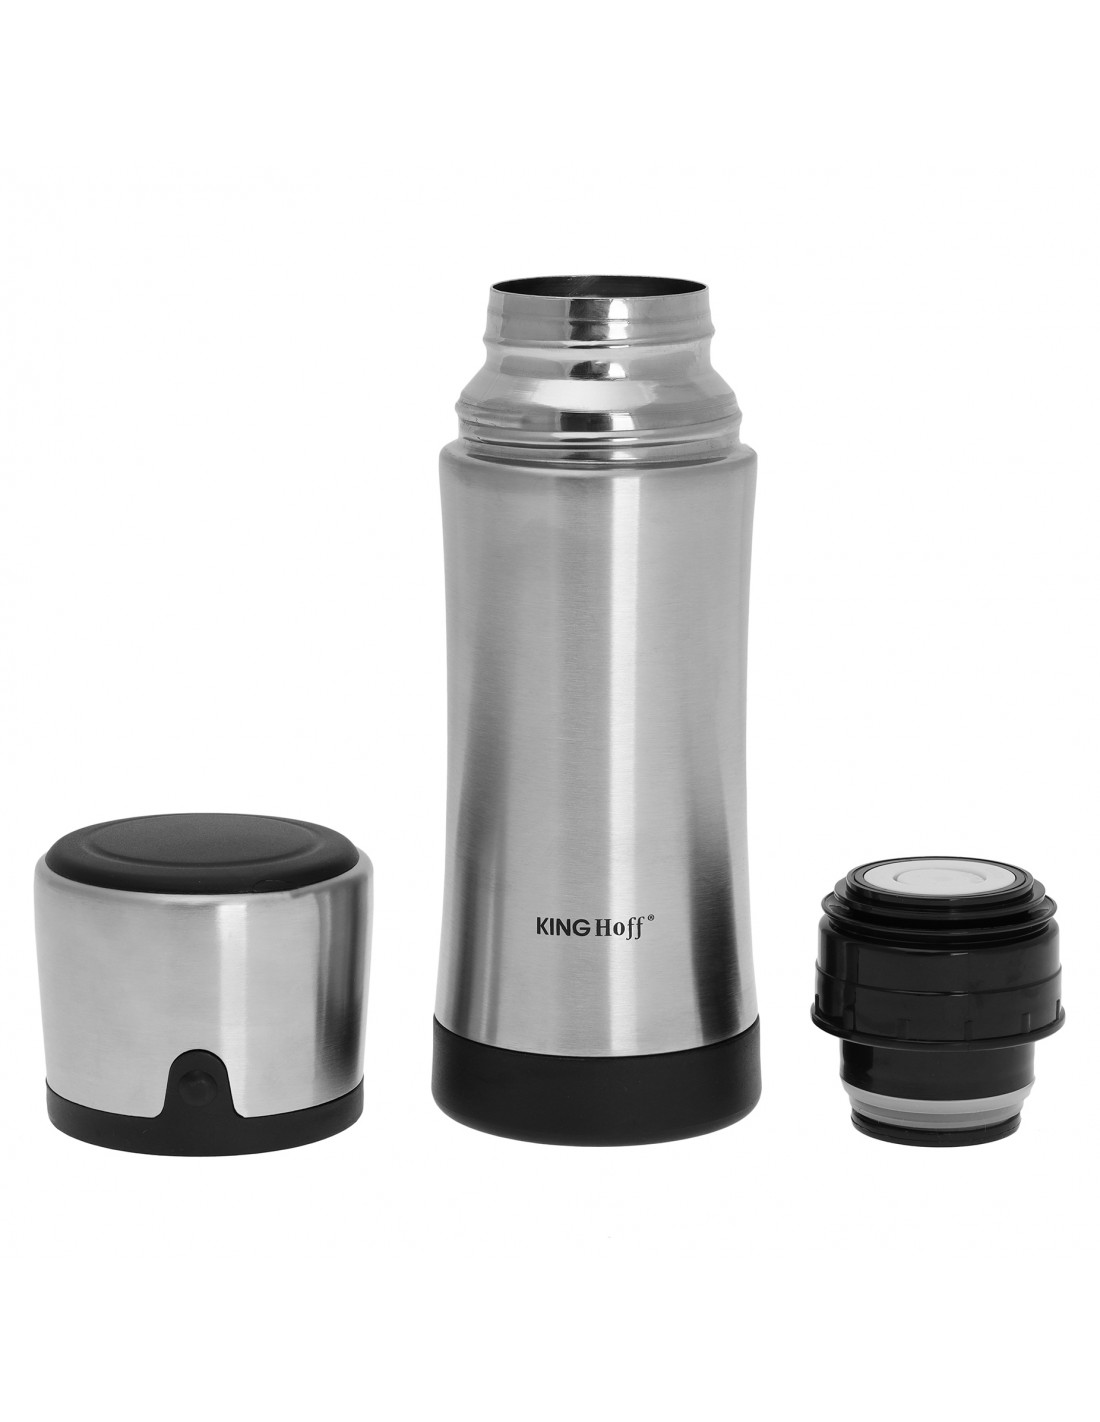 0.6L Kinghoff Insulated Container for Food Stainless Steel Double-Walled Flask 